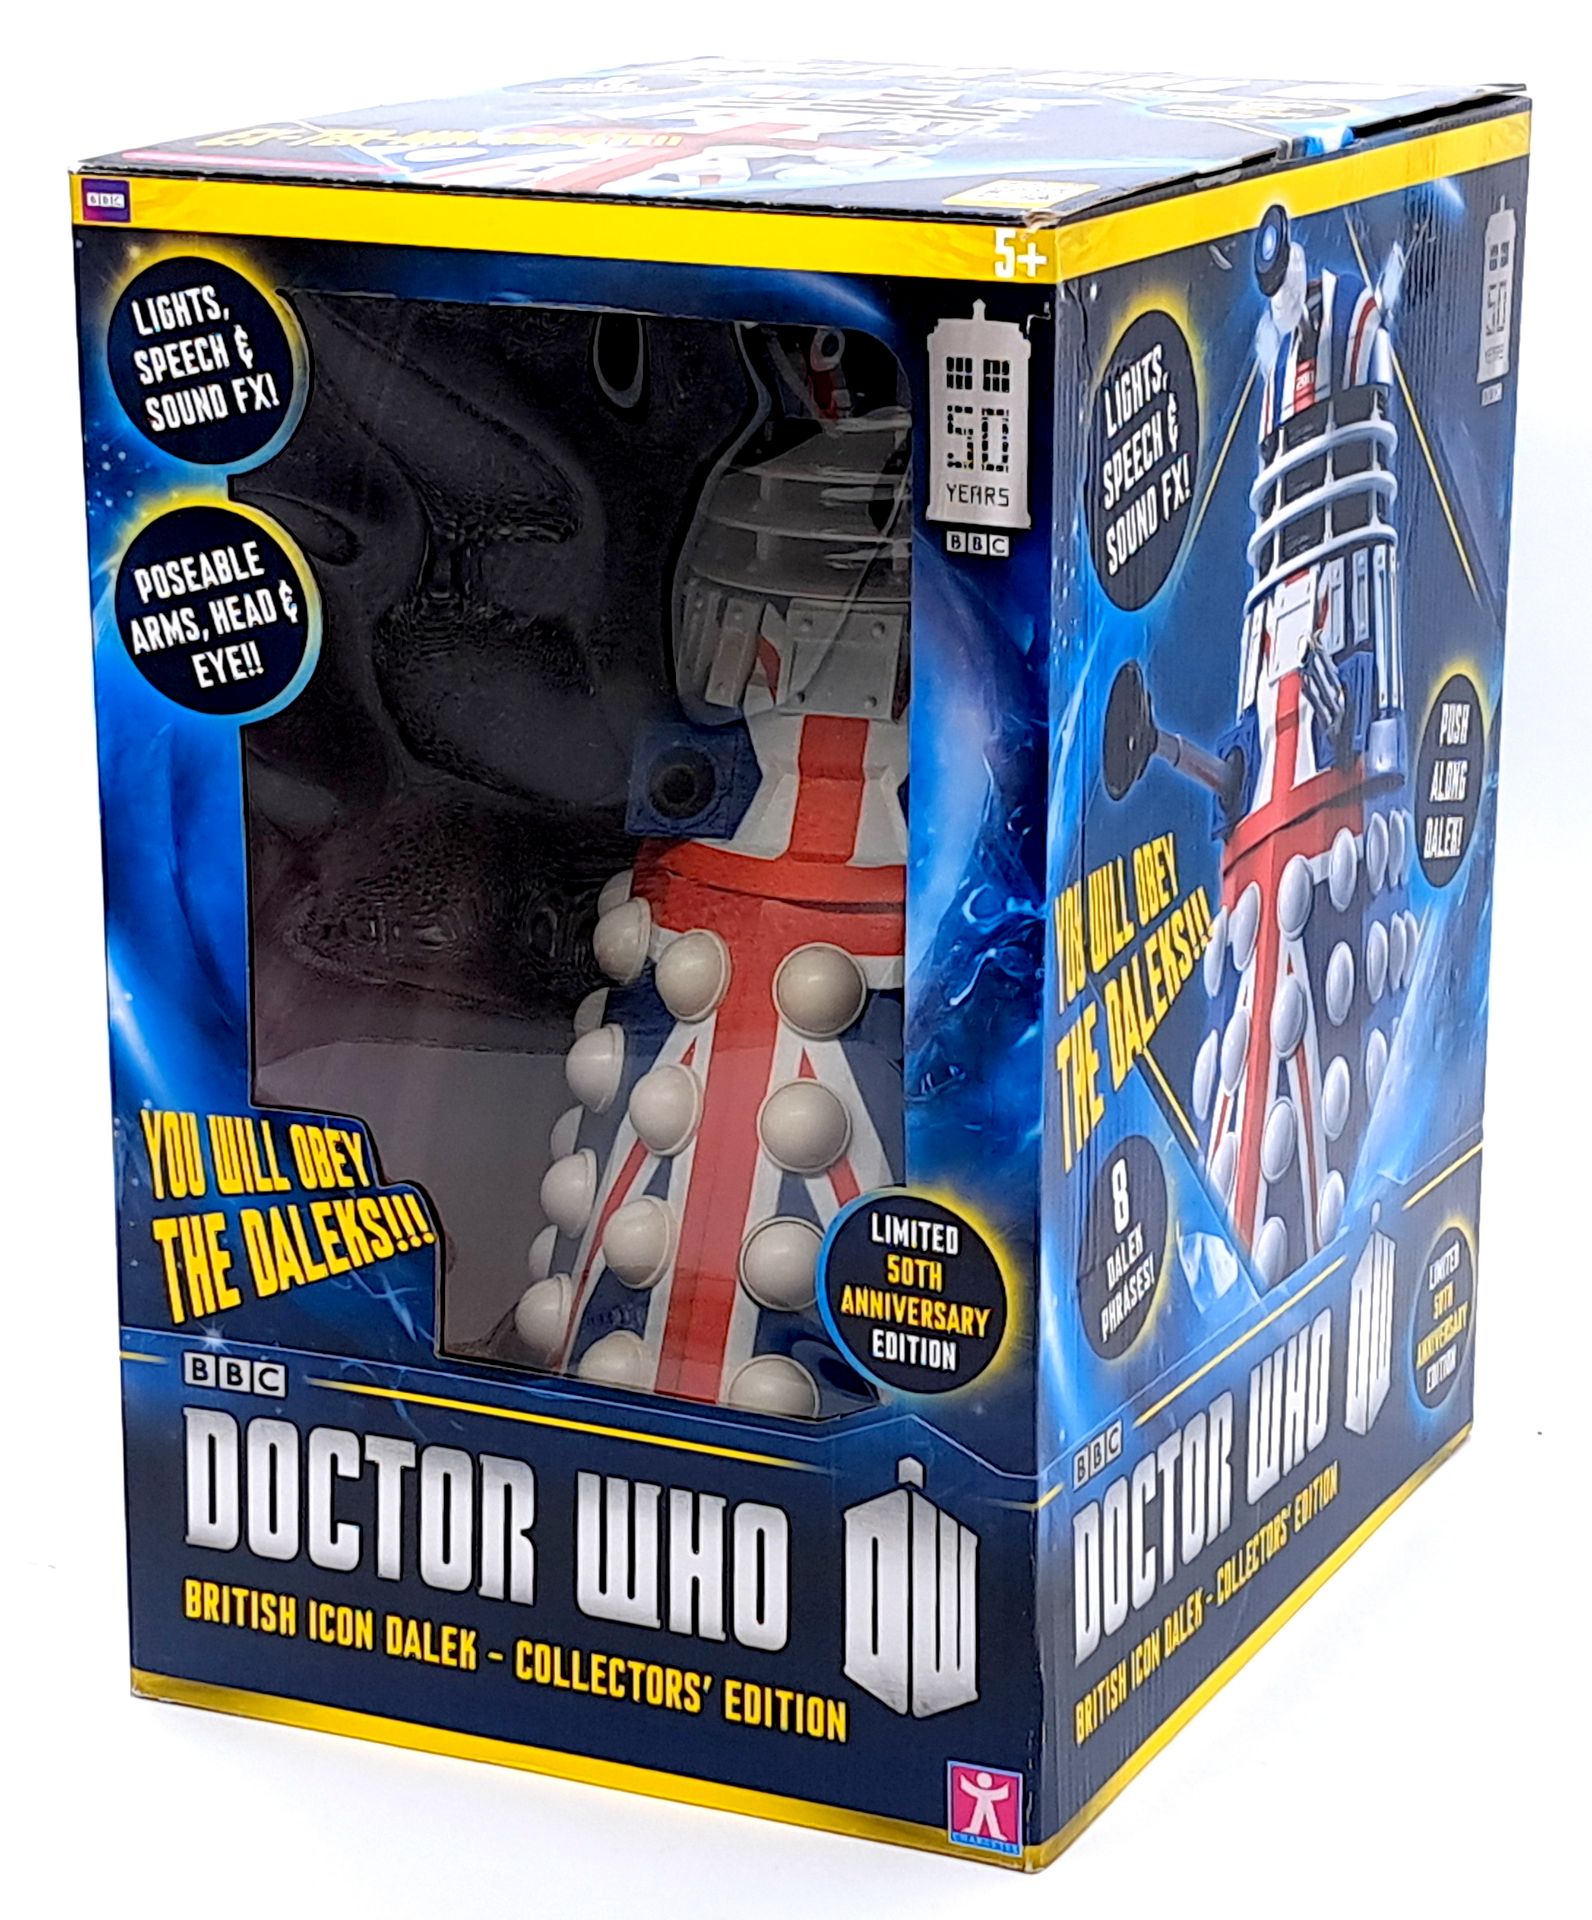 Character Doctor Who British Icon Dalek